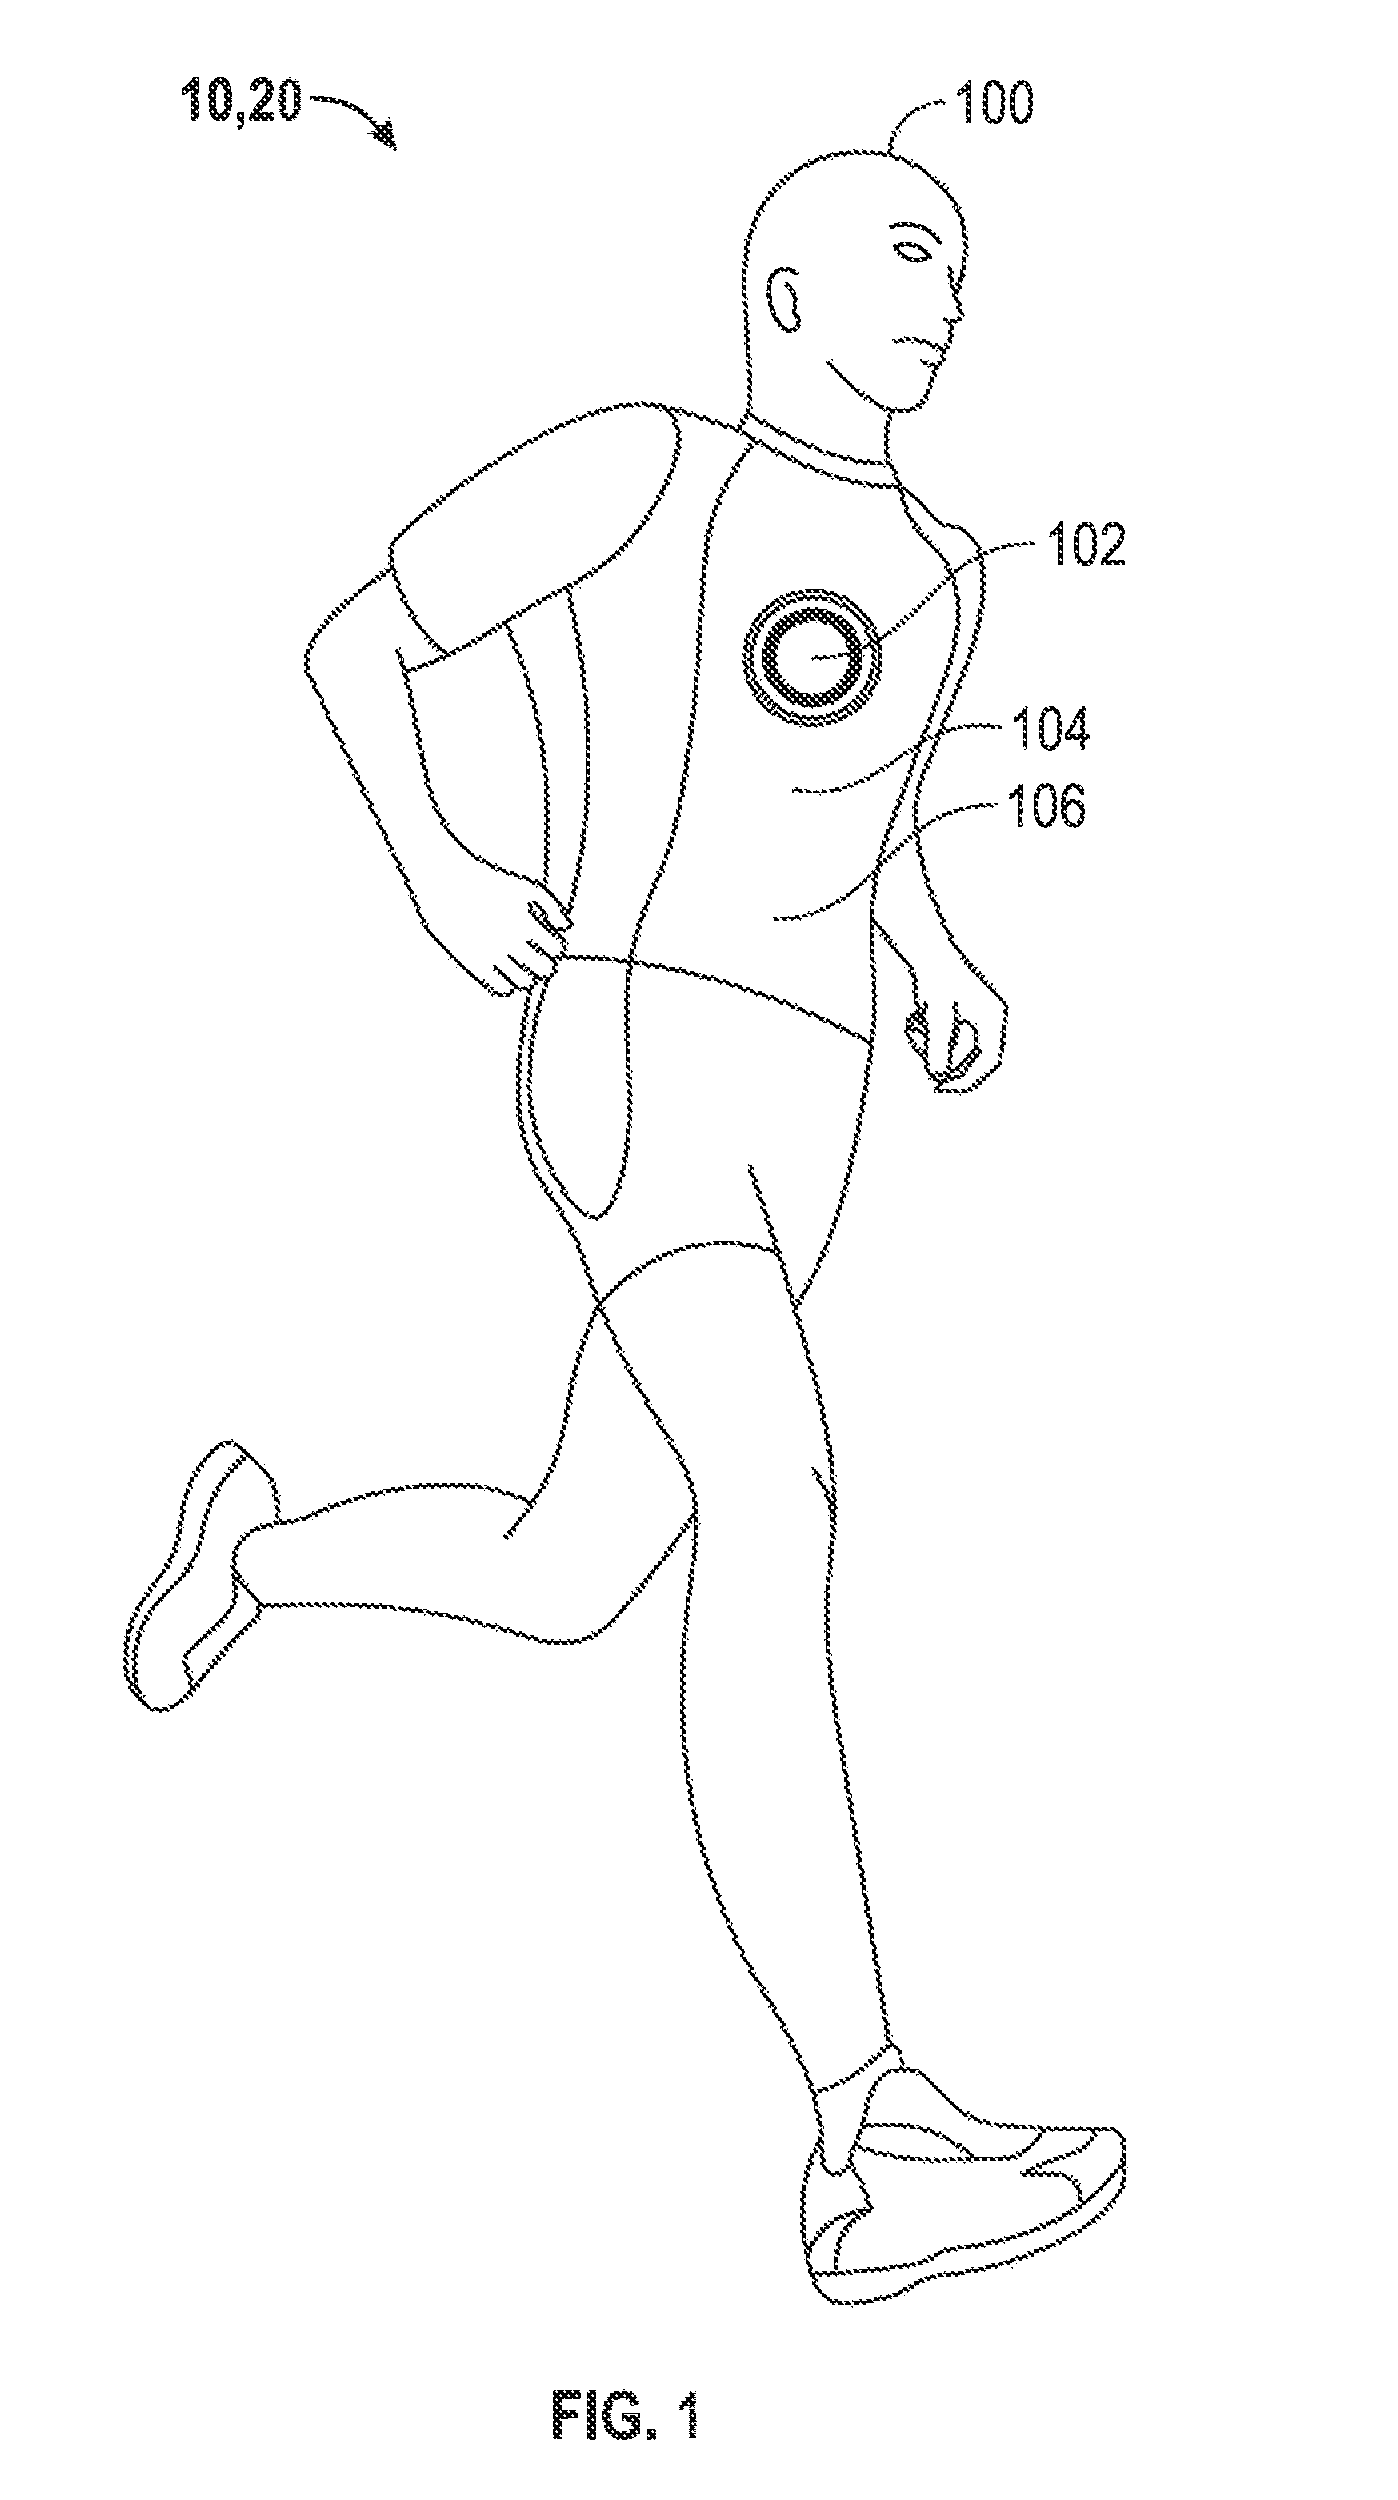 Sport ball athletic activity monitoring methods and systems